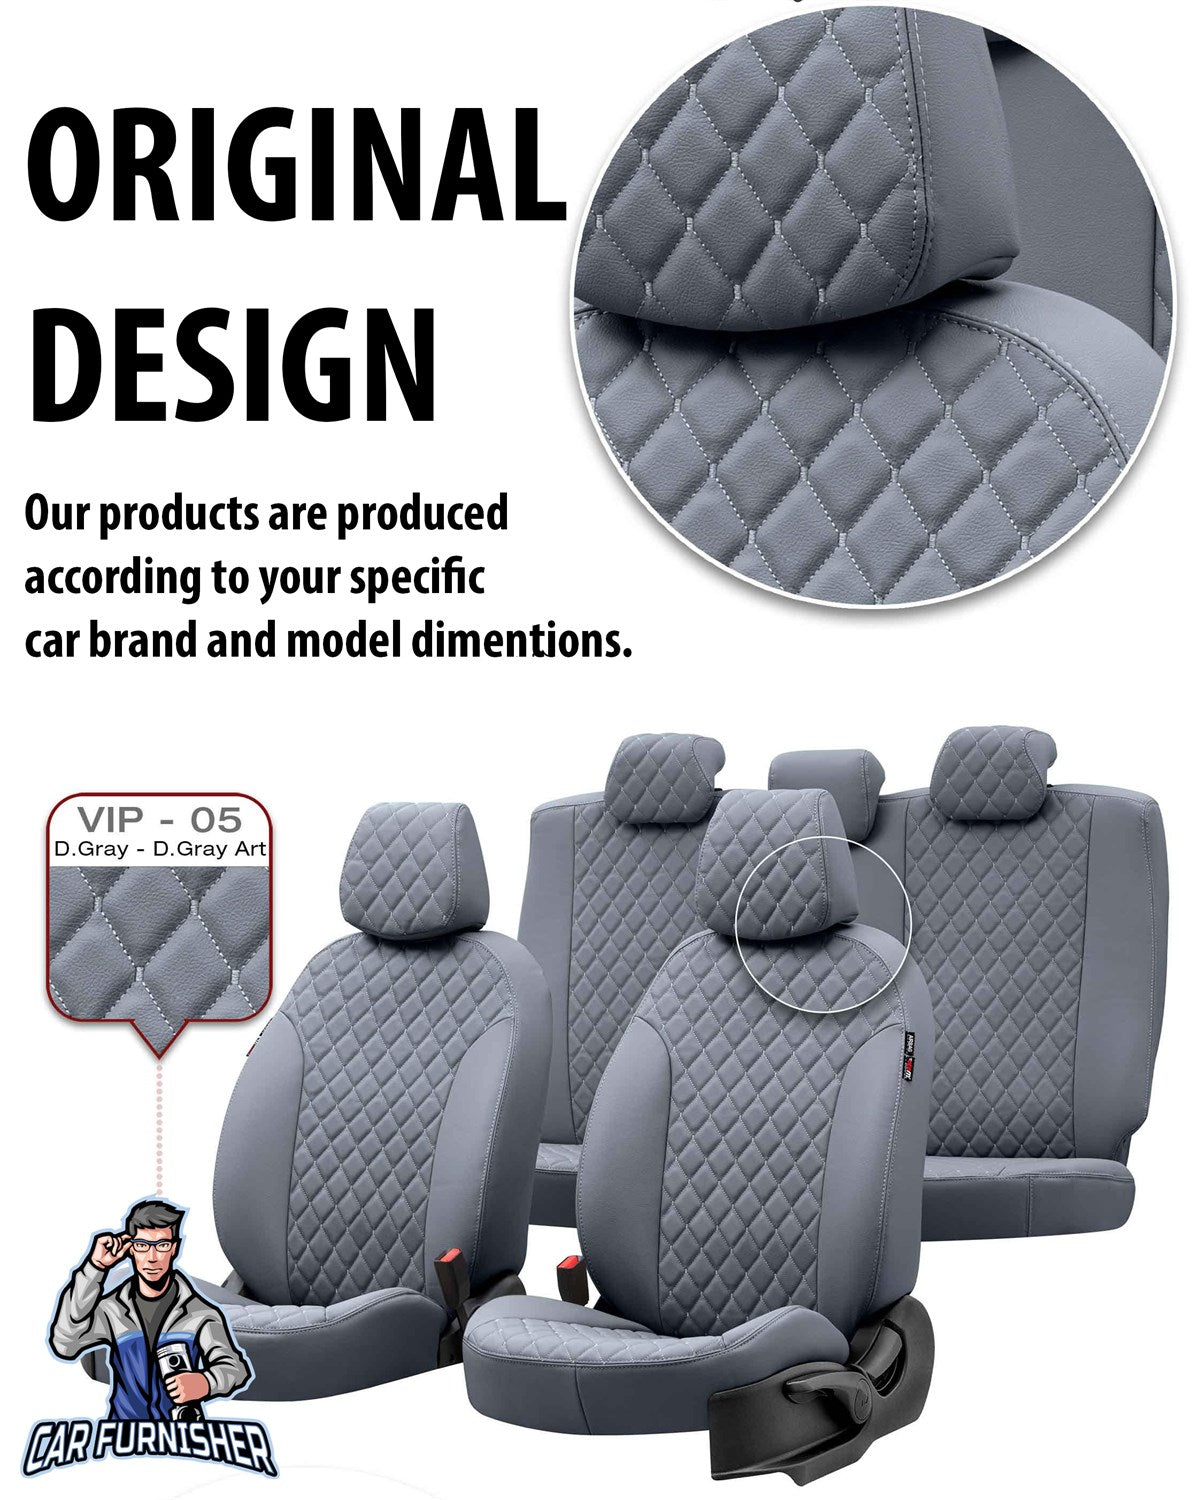 Skoda Roomstar Seat Cover Madrid Leather Design Blue Leather